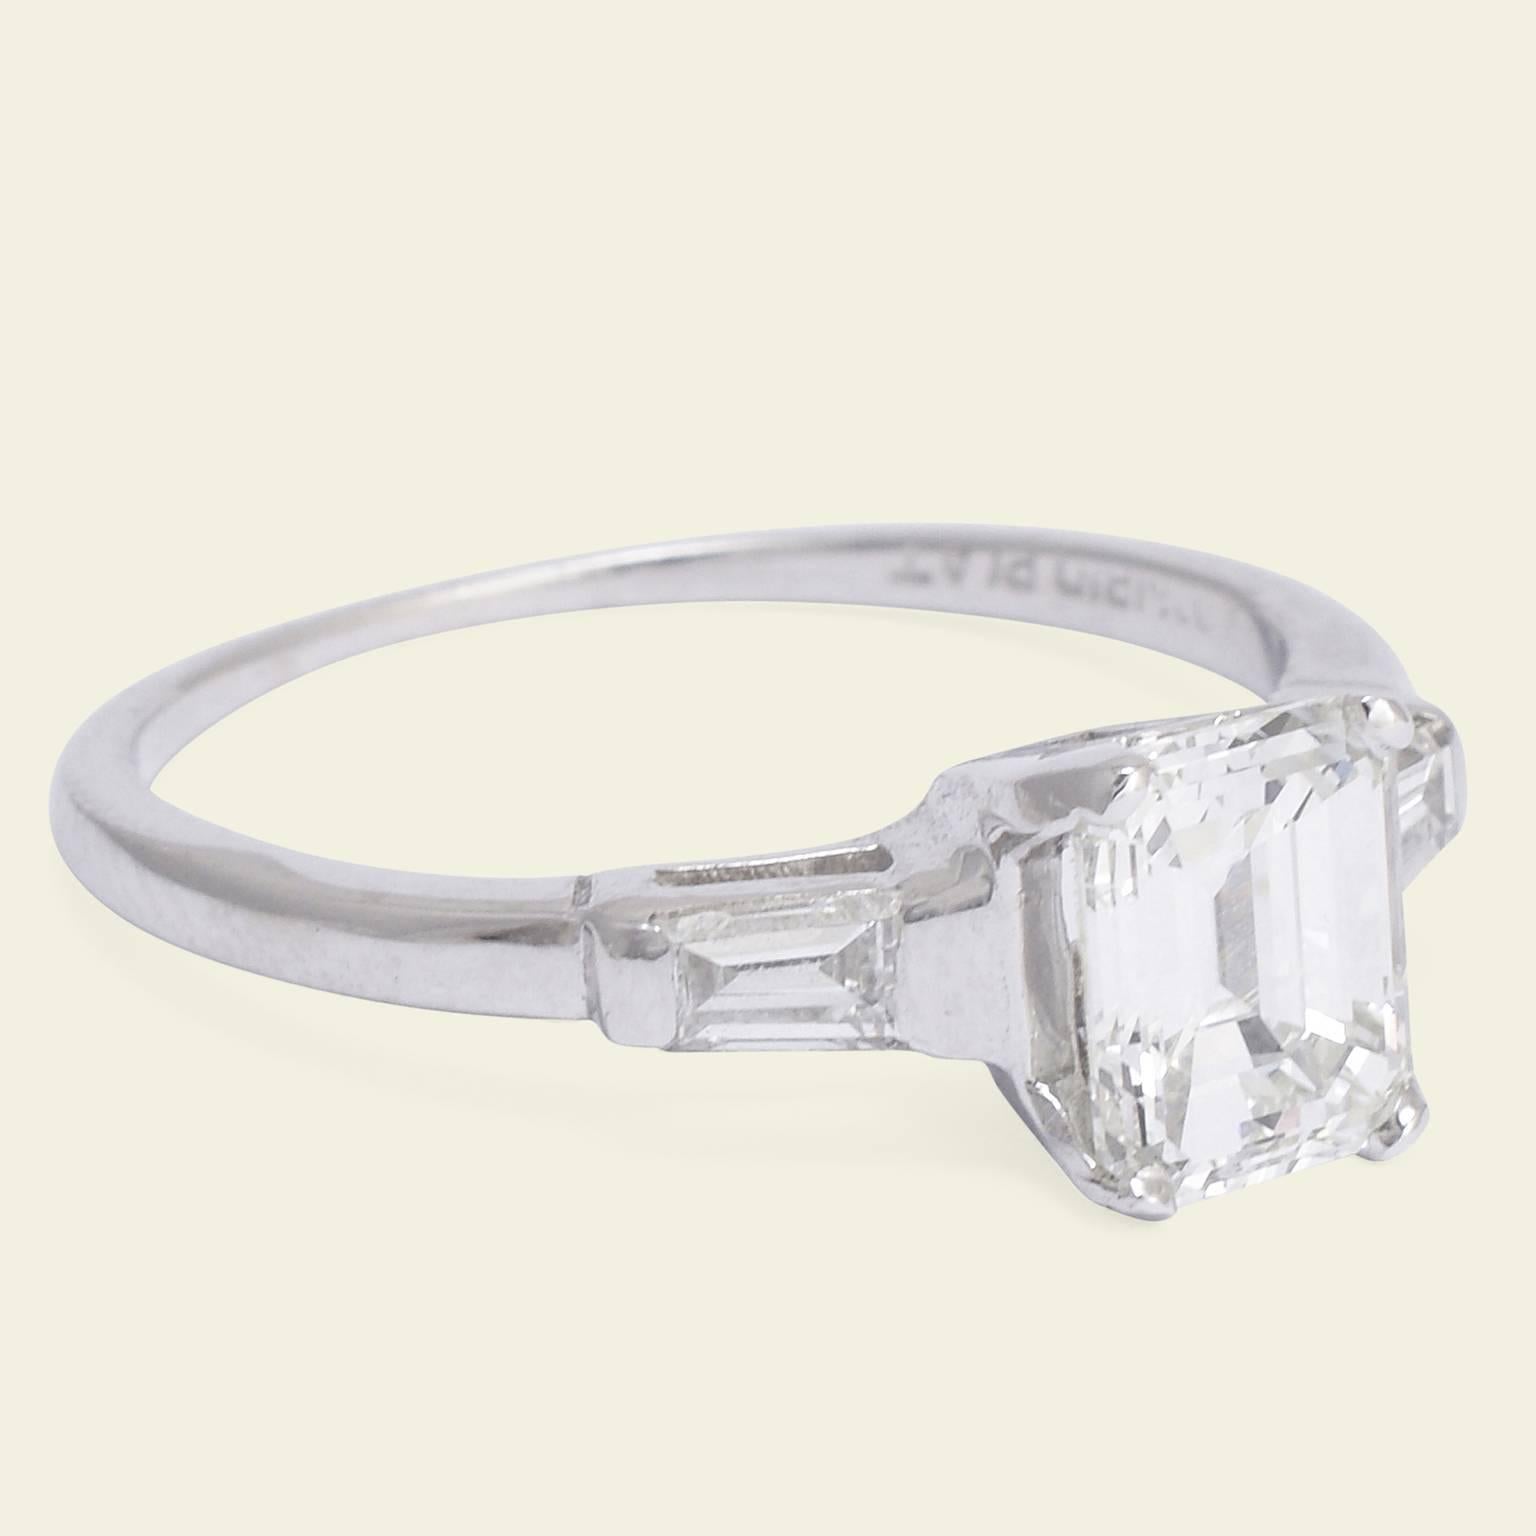 Fashioned in platinum c. 1950, this stunning engagement ring features a 1.14ct emerald cut diamond (G/VS1) accented with tapered diamond baguettes. The mounting, in true midcentury style, is very minimal with a narrow half round hoop. This ring